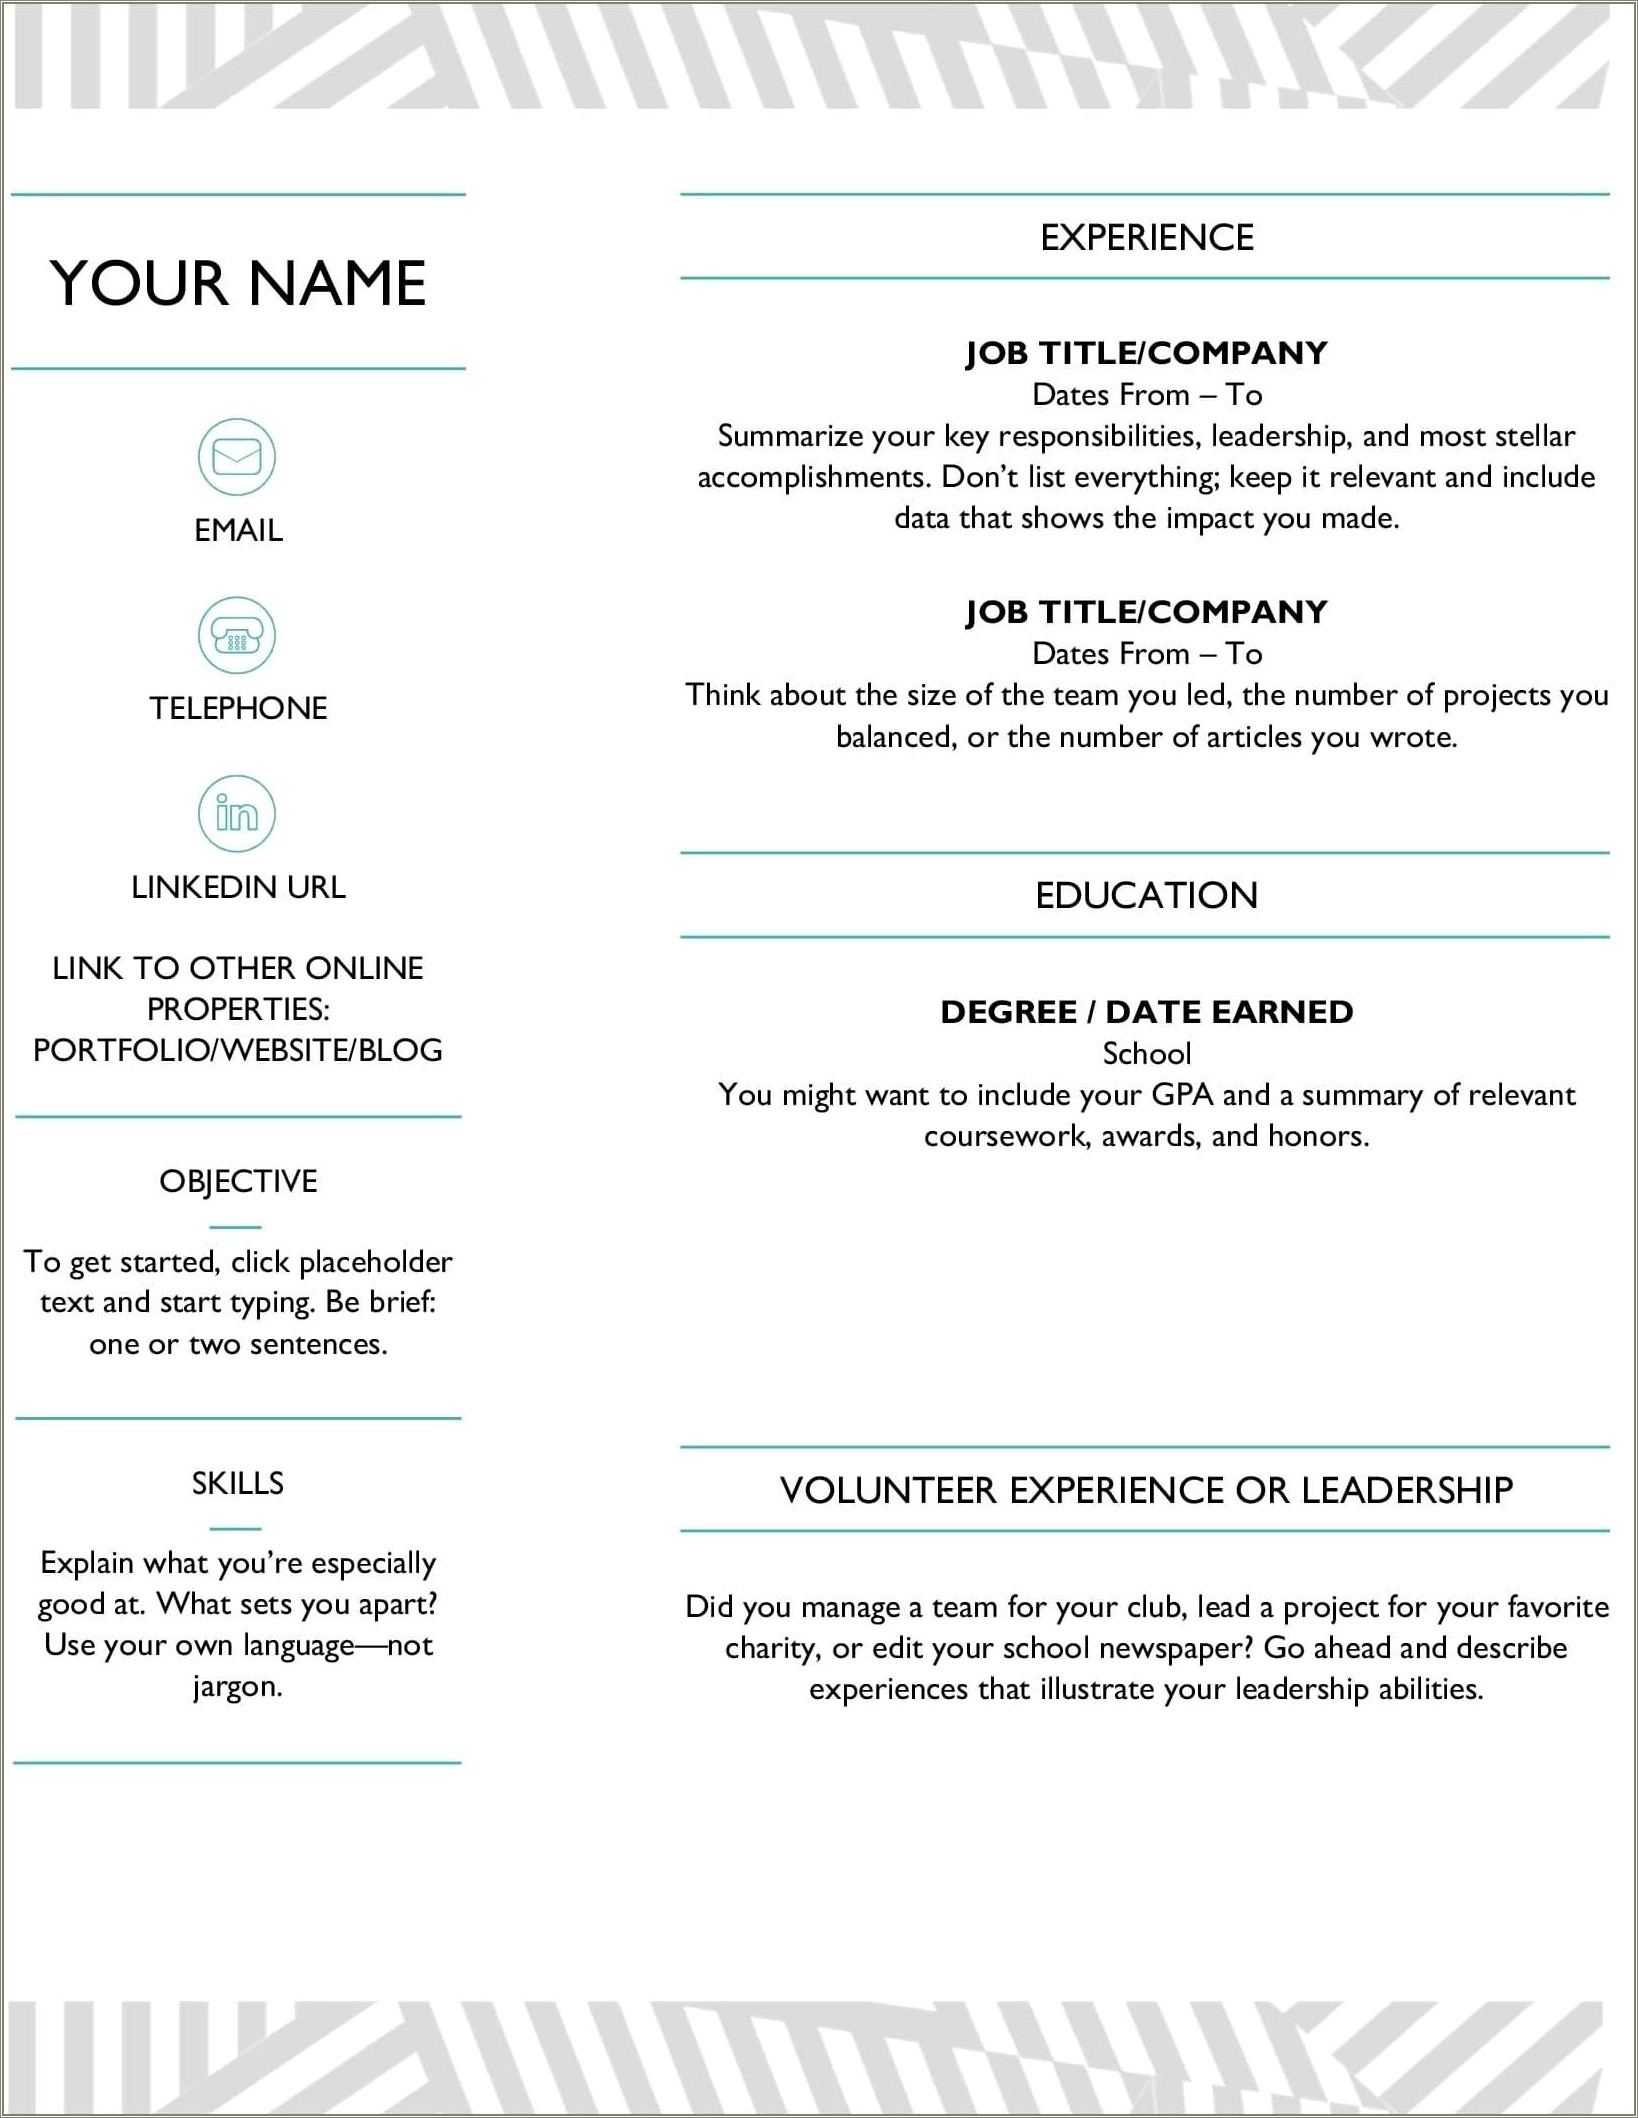 create-a-resume-template-on-word-resume-example-gallery